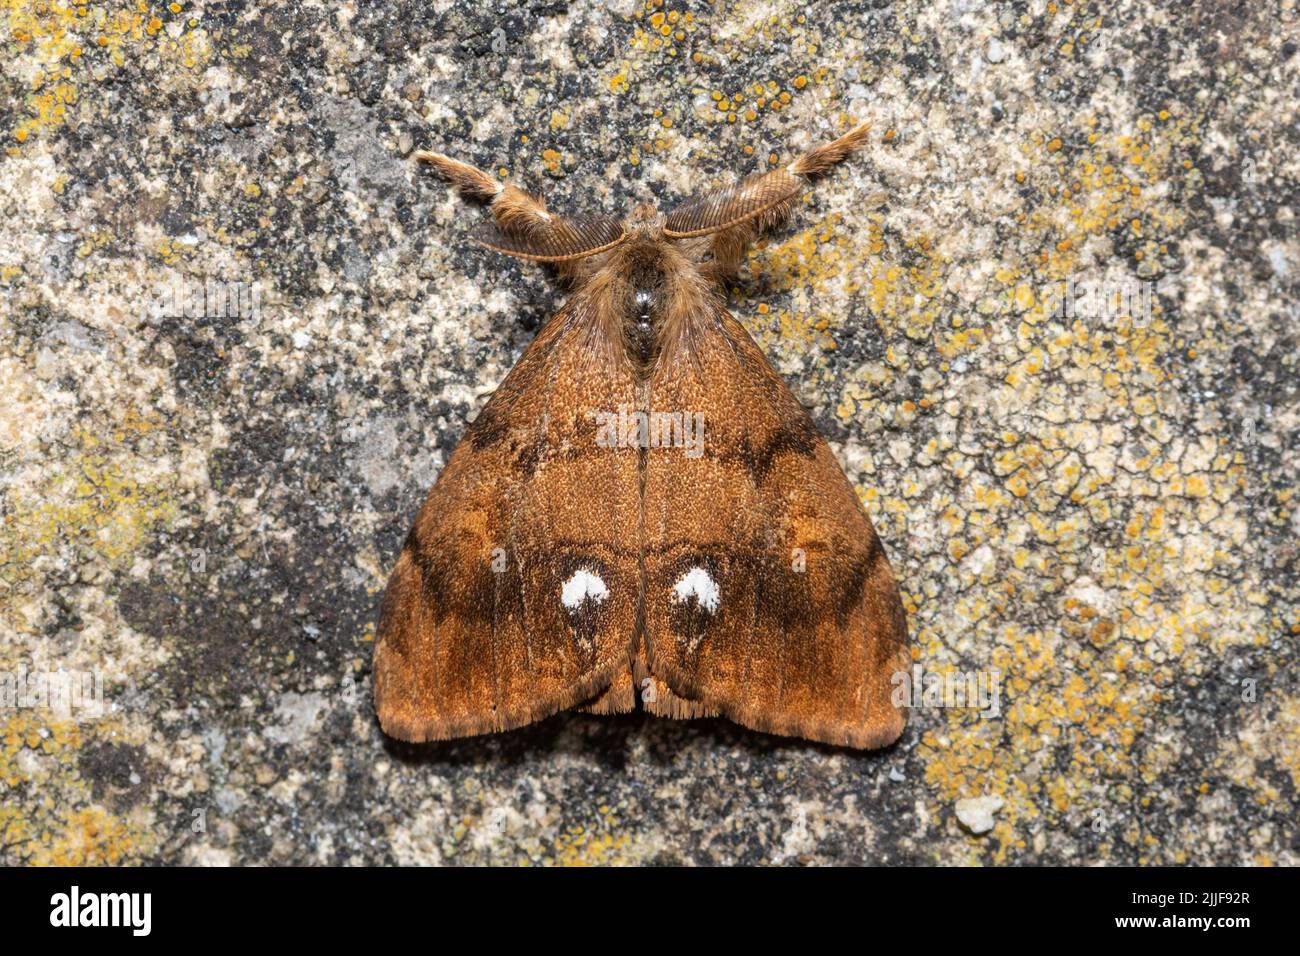 Orgyia antiqua, the vapourer or rusty tussock moth, close-up of a male insect, England, UK Stock Photo